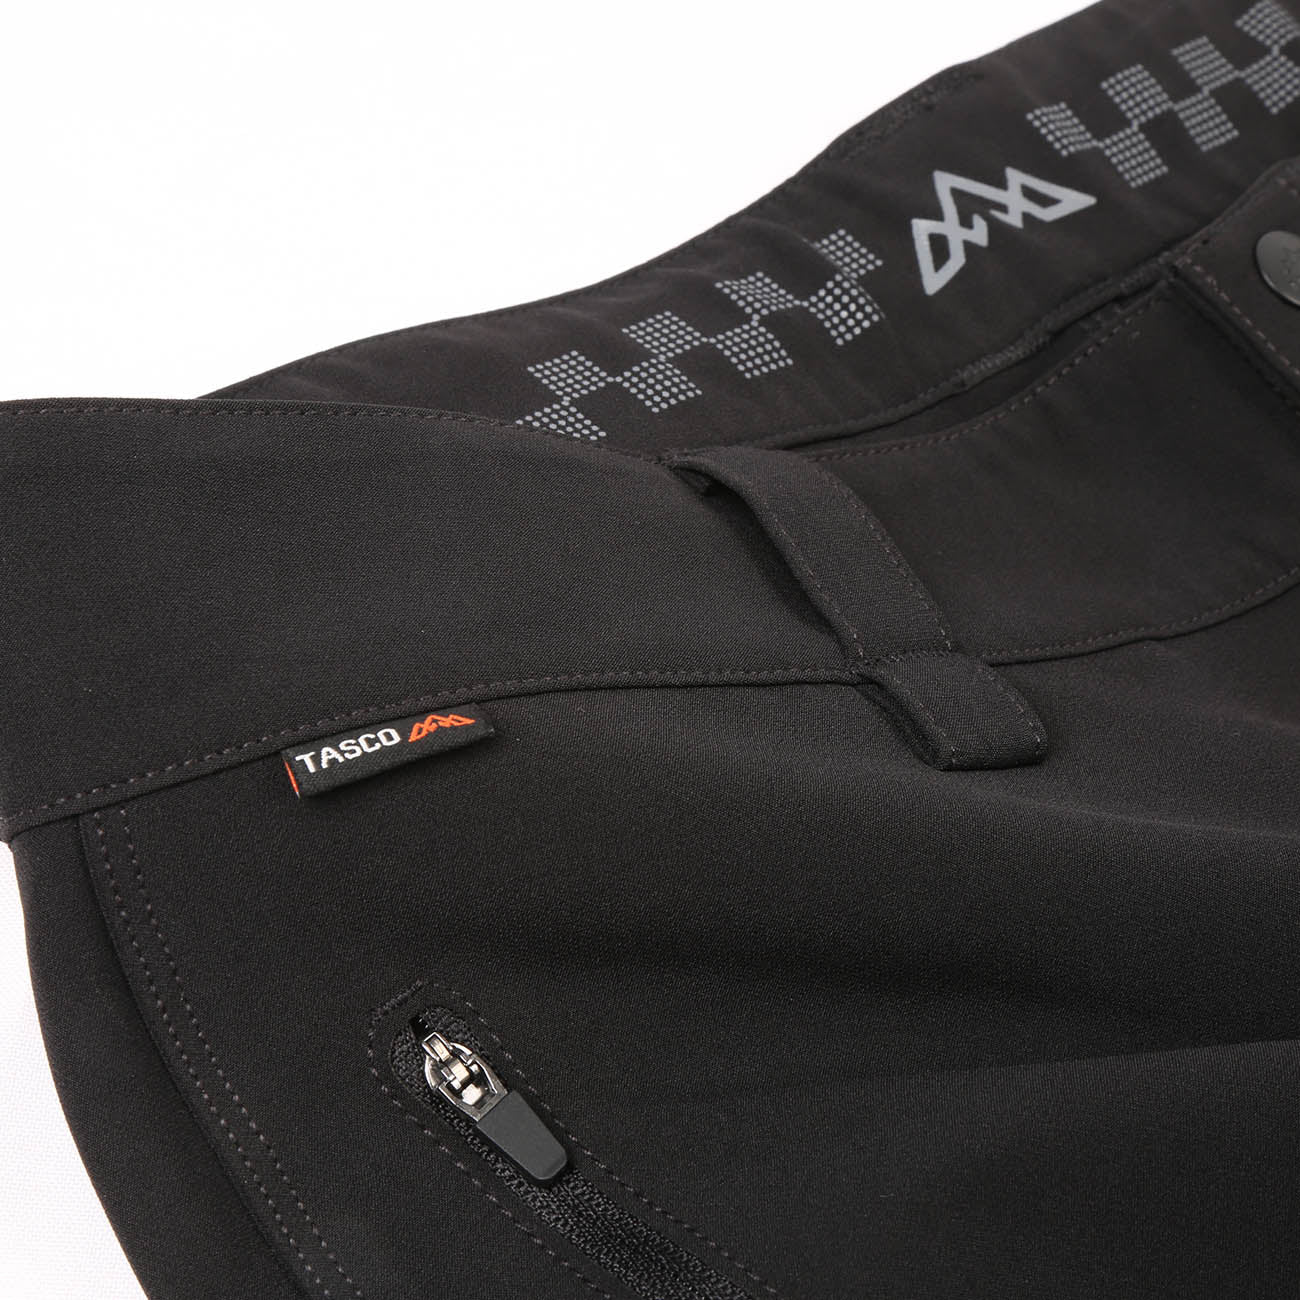 Scout MTB Pants. Detail showing the park pass loop and locking SBS front pocket zipper